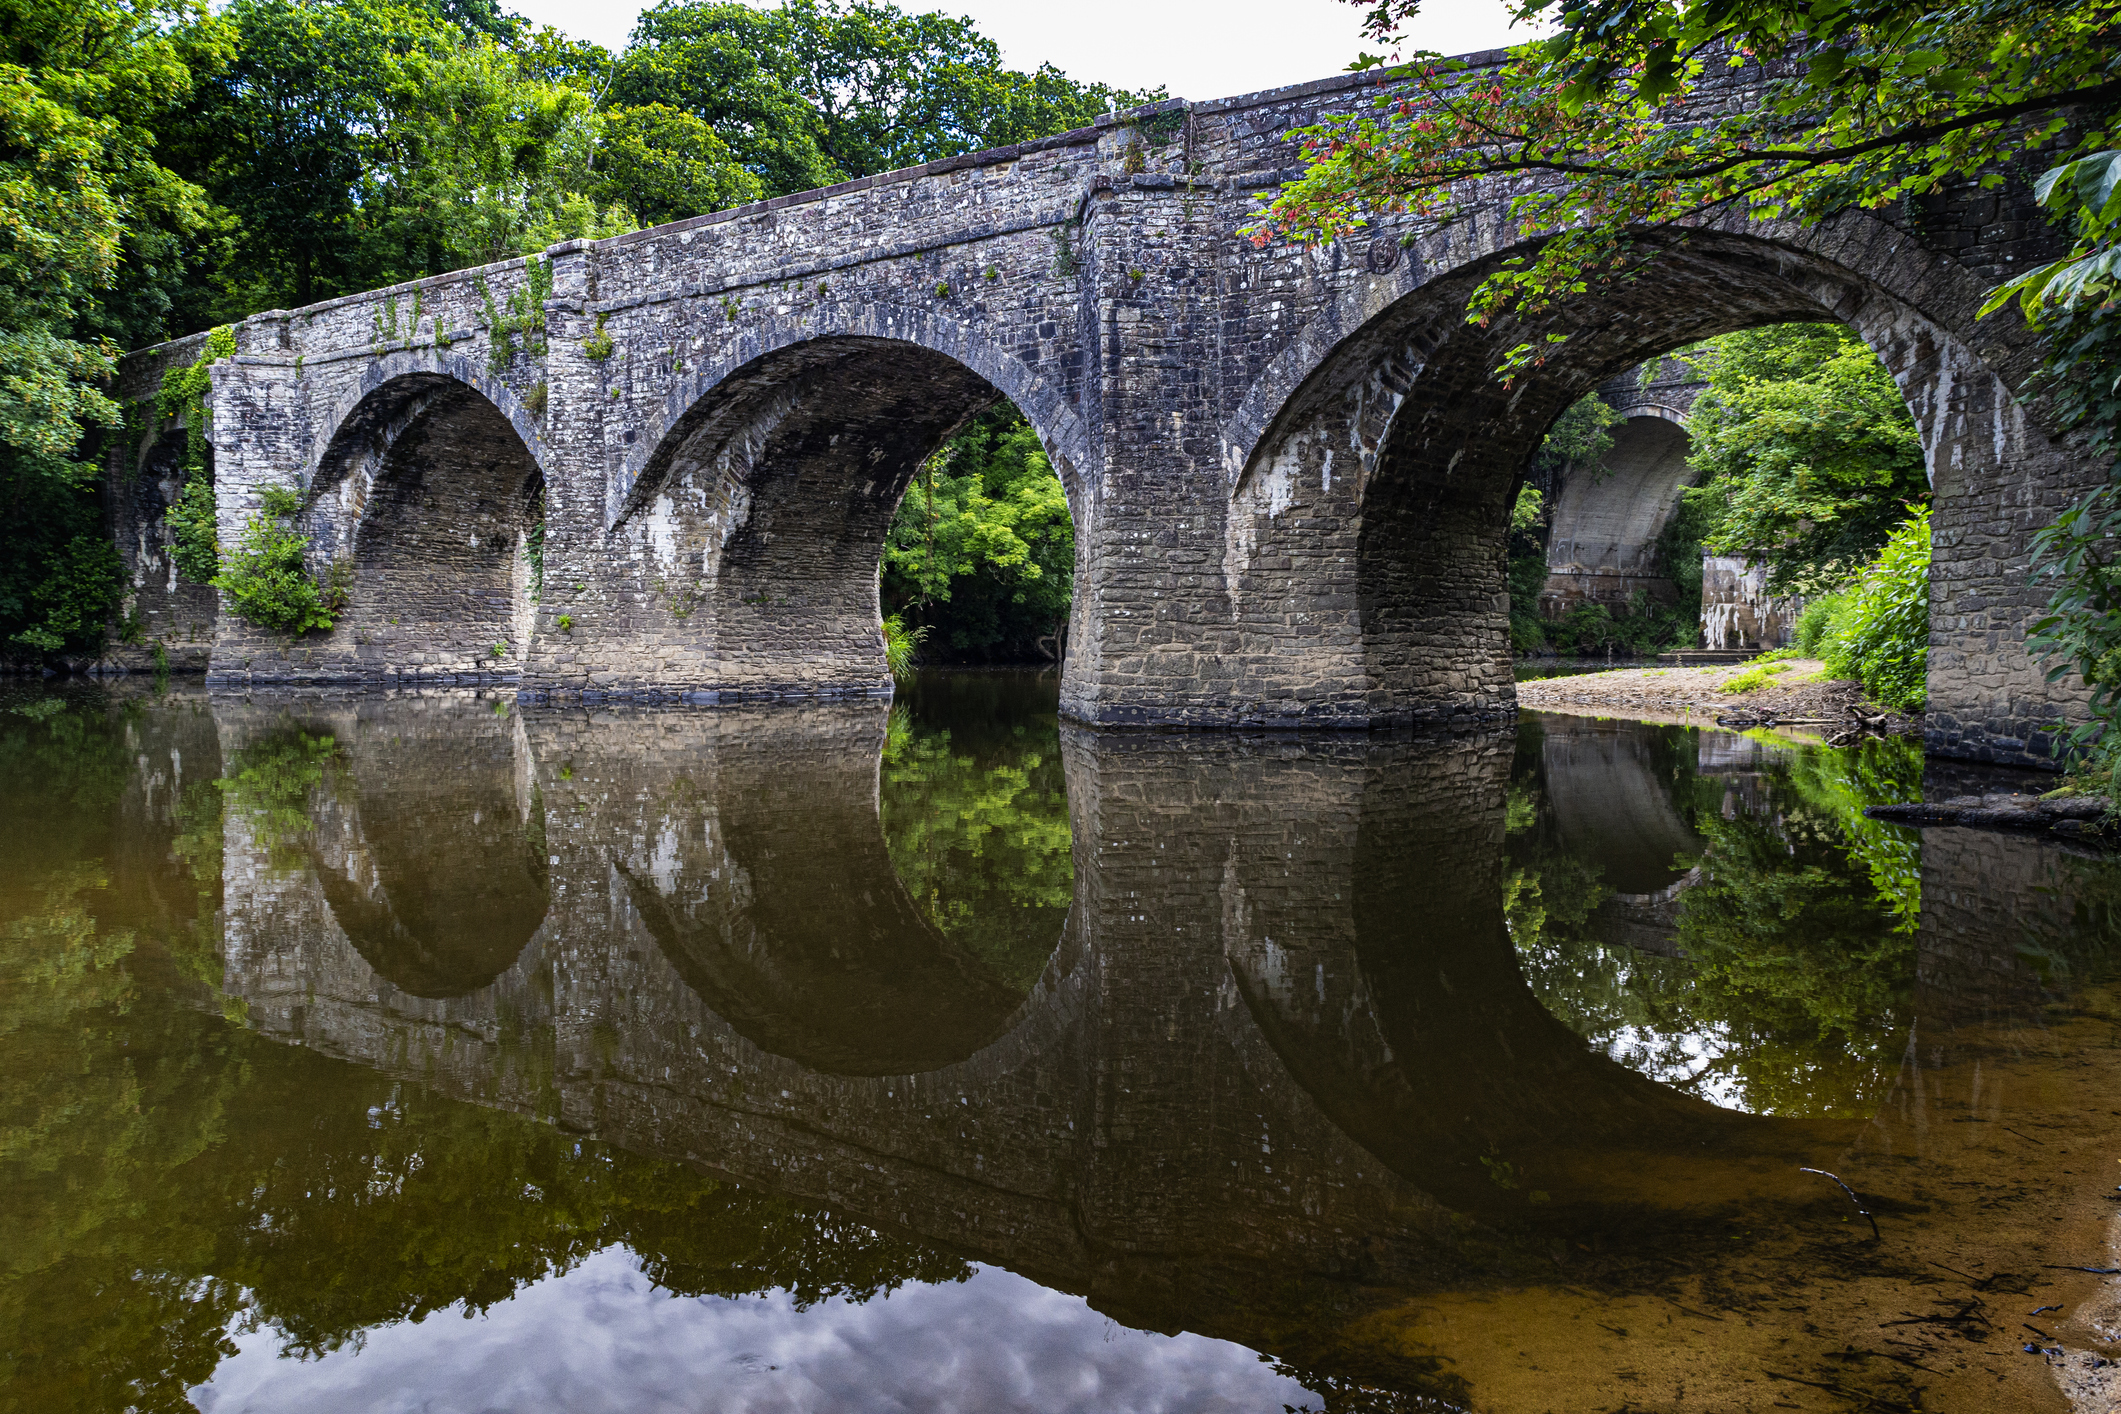 Colourful Summer Detail of Historic Rothern Bridge, Reflections and Low Water Level on the River Torridge - Upstream View